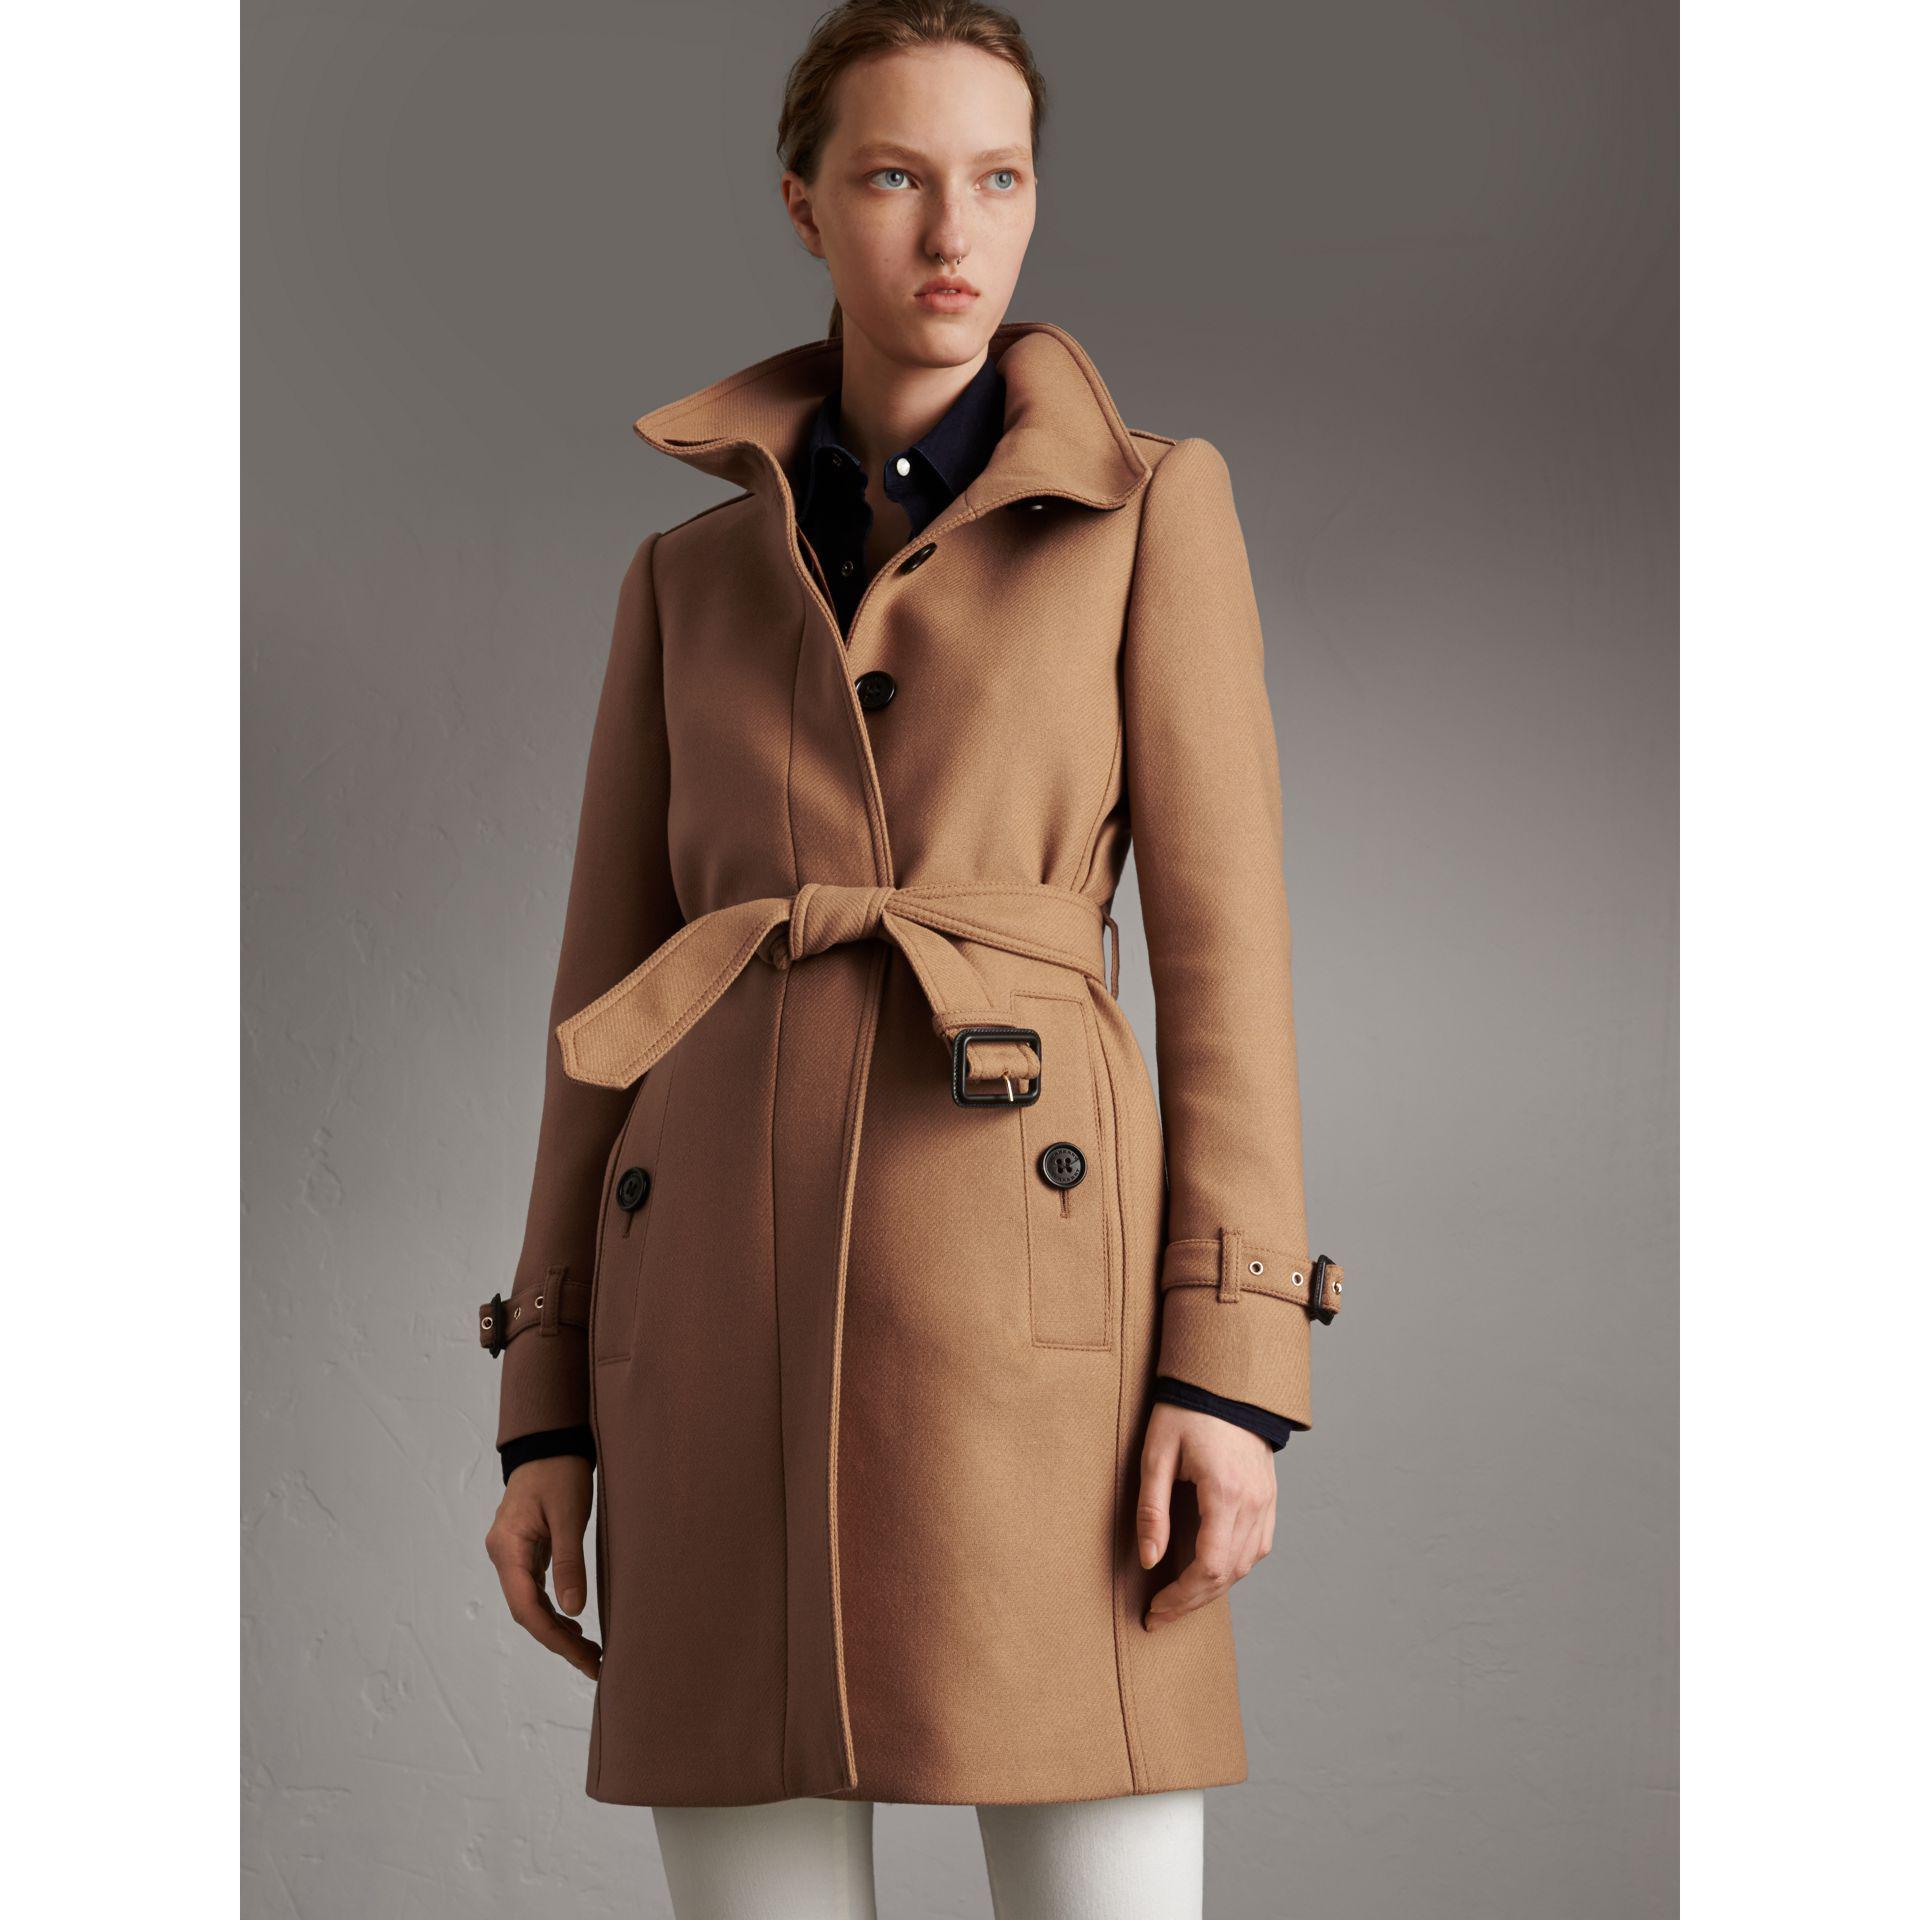 Lyst - Burberry Technical Wool Cashmere Funnel Neck Coat Camel in Natural